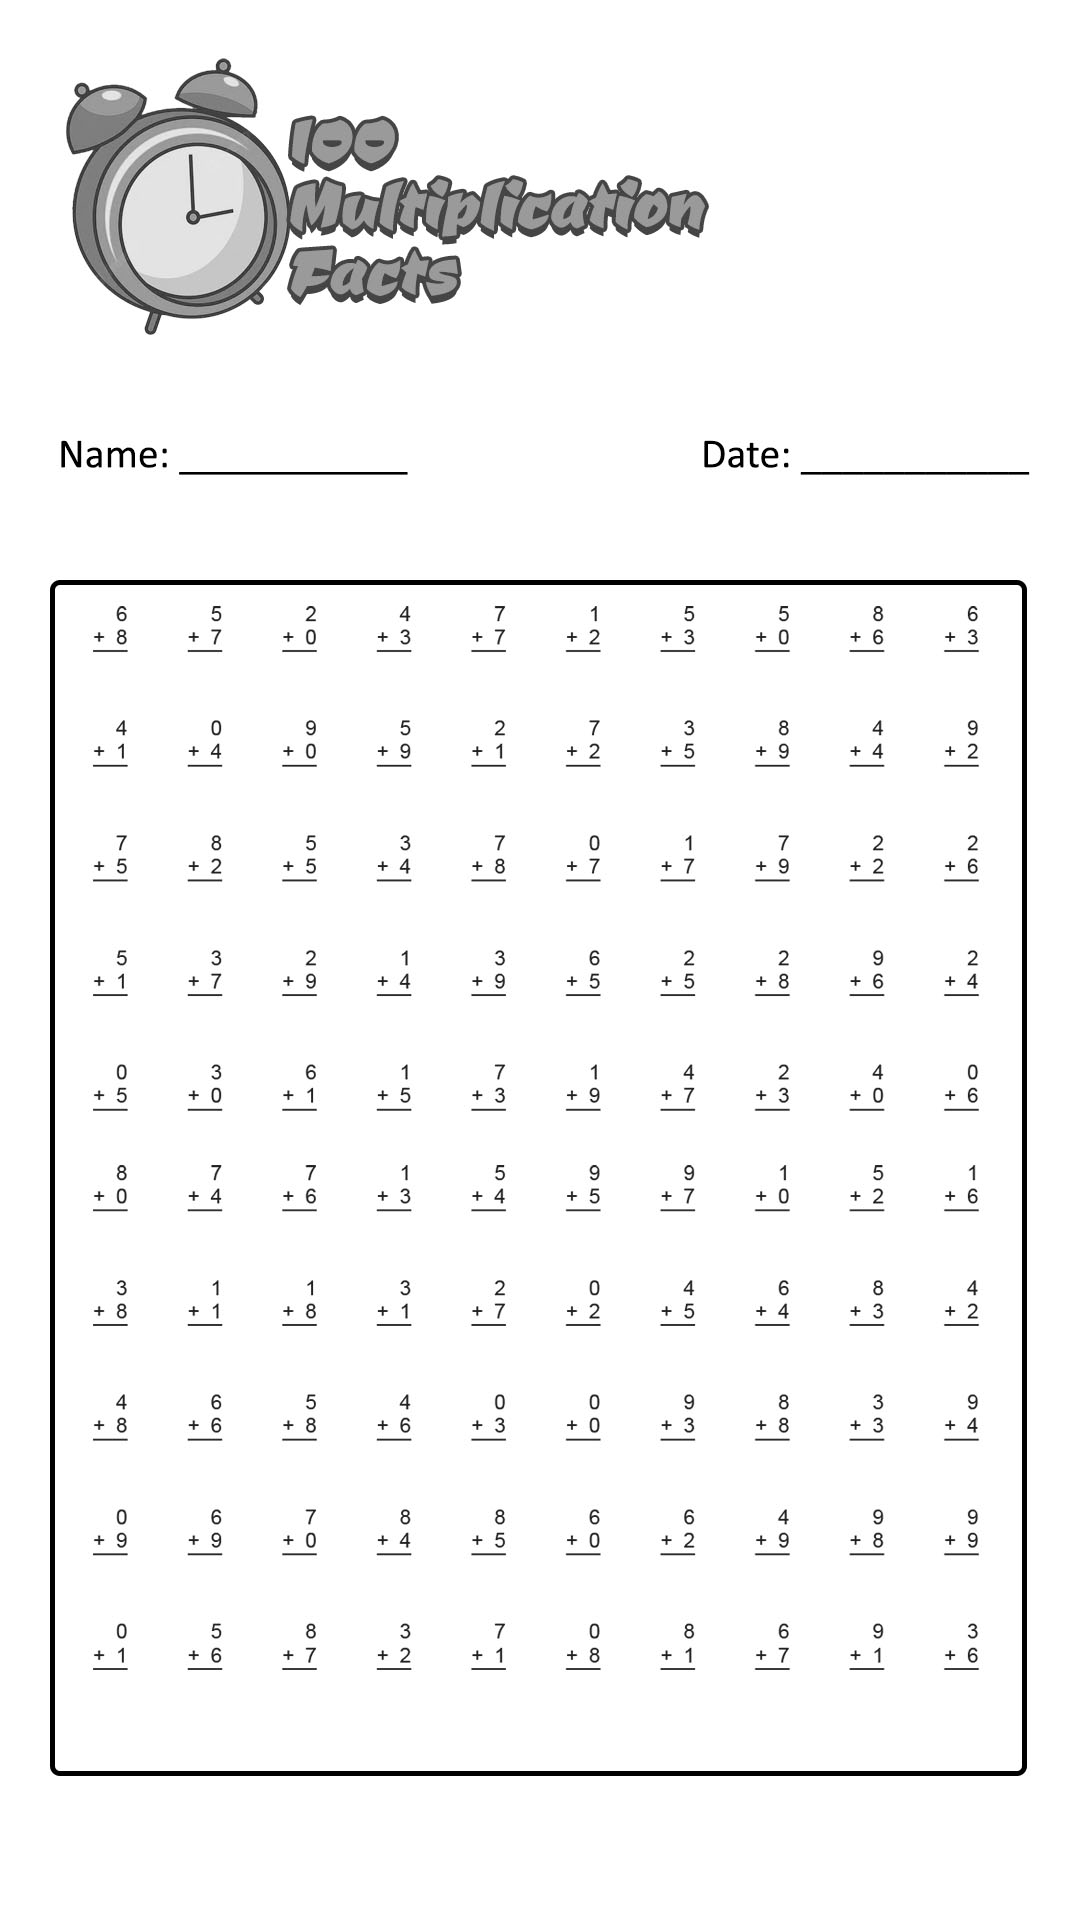 100 Multiplication Facts Timed Test